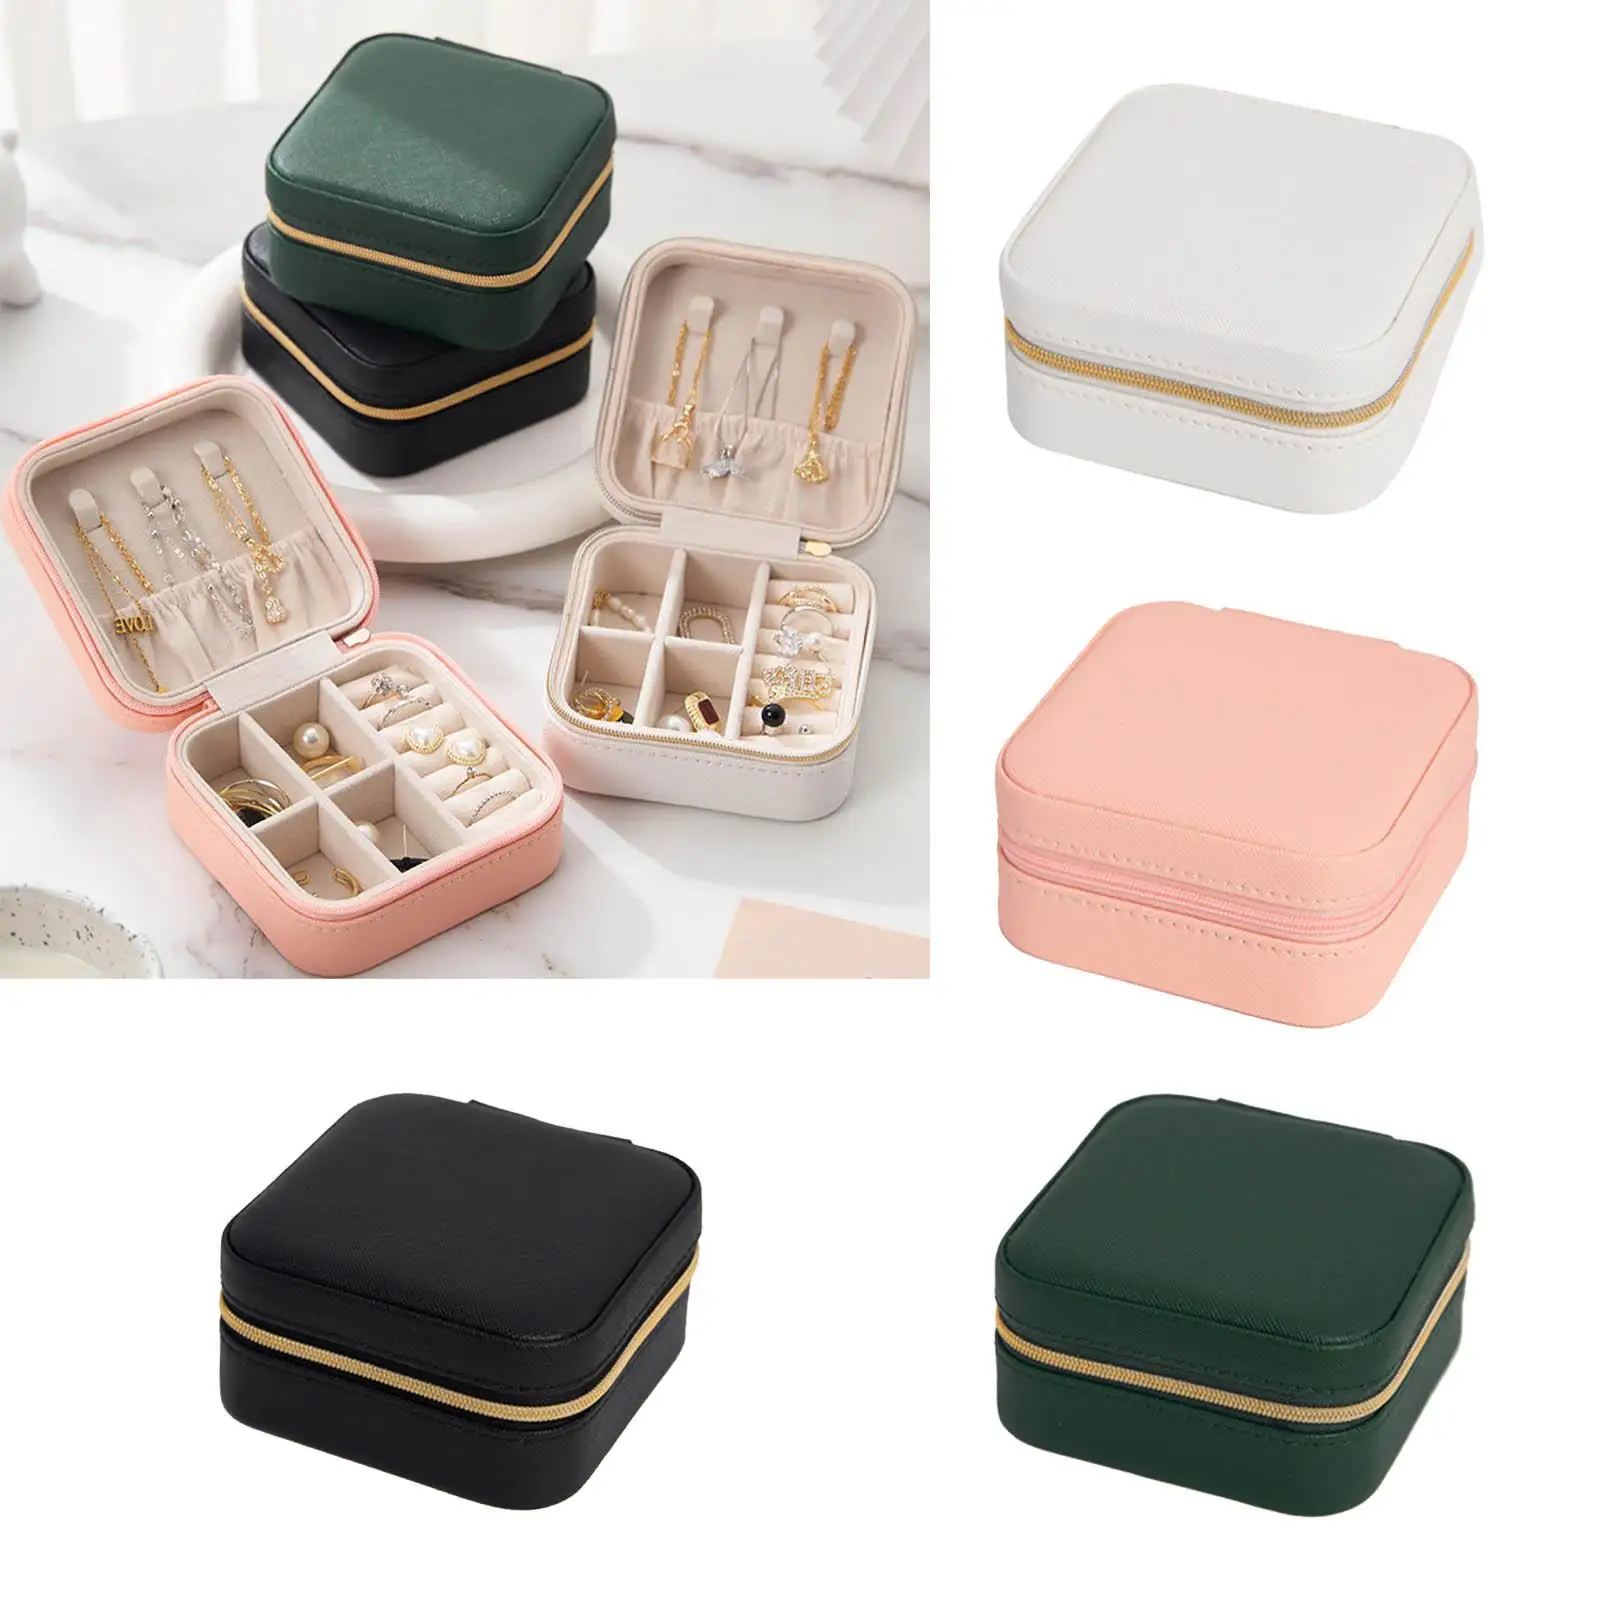 PU Leather Travel Jewelry Box Organizer Case Necklace Holder Display Storage Velvet Lined Container Portable for Rings Bracelets